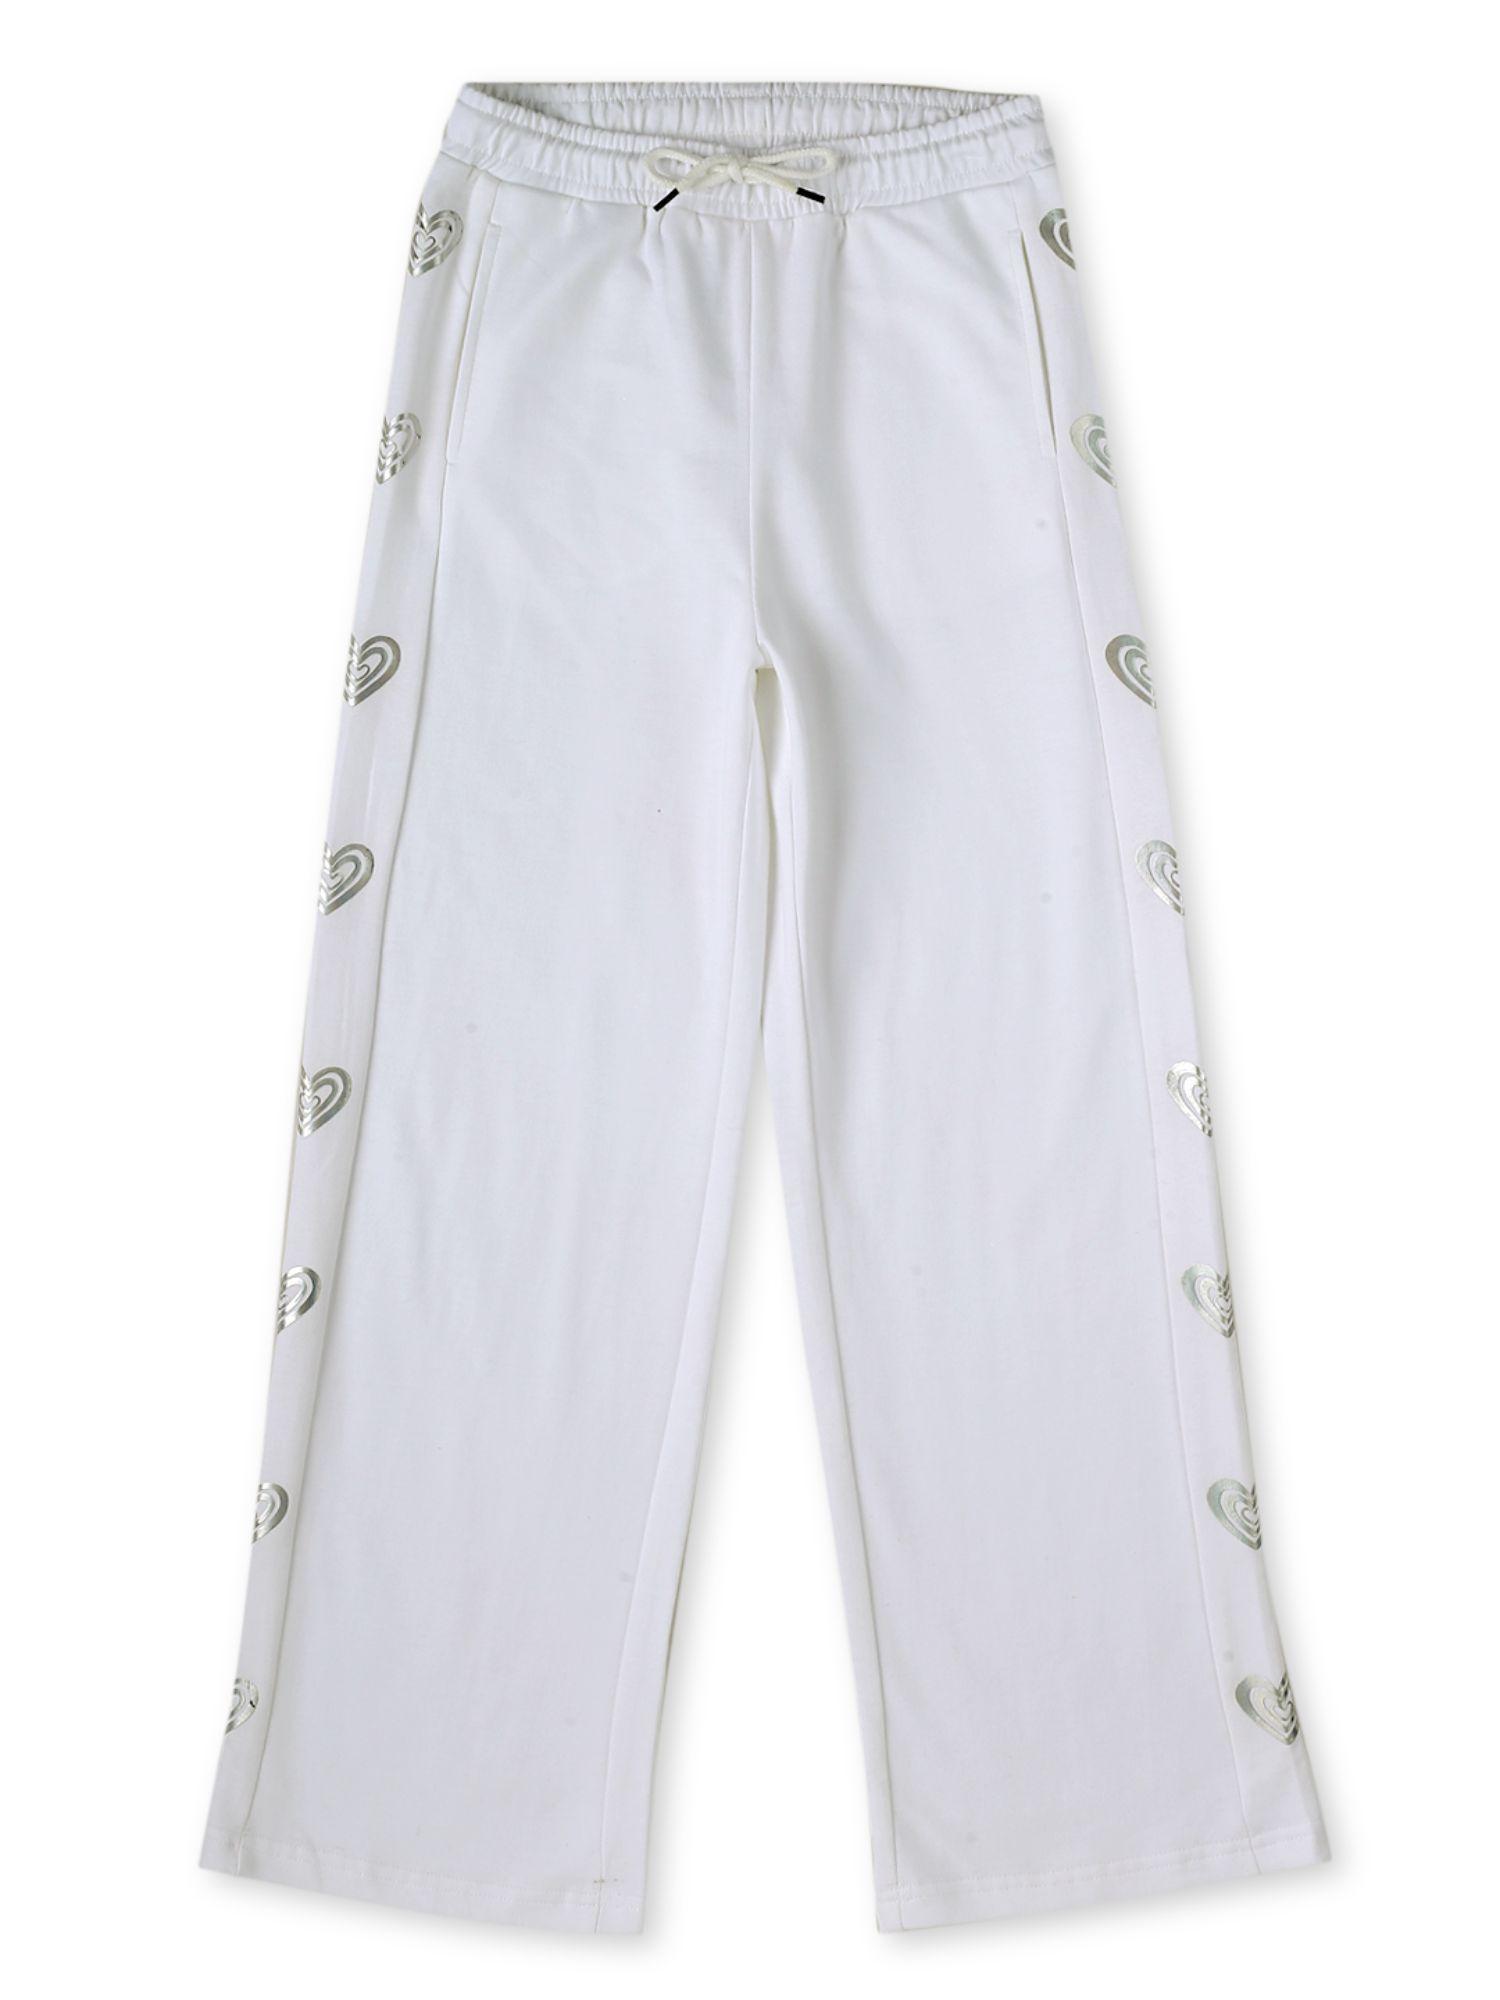 girls-white-printed-cotton-elasticated-track-pant